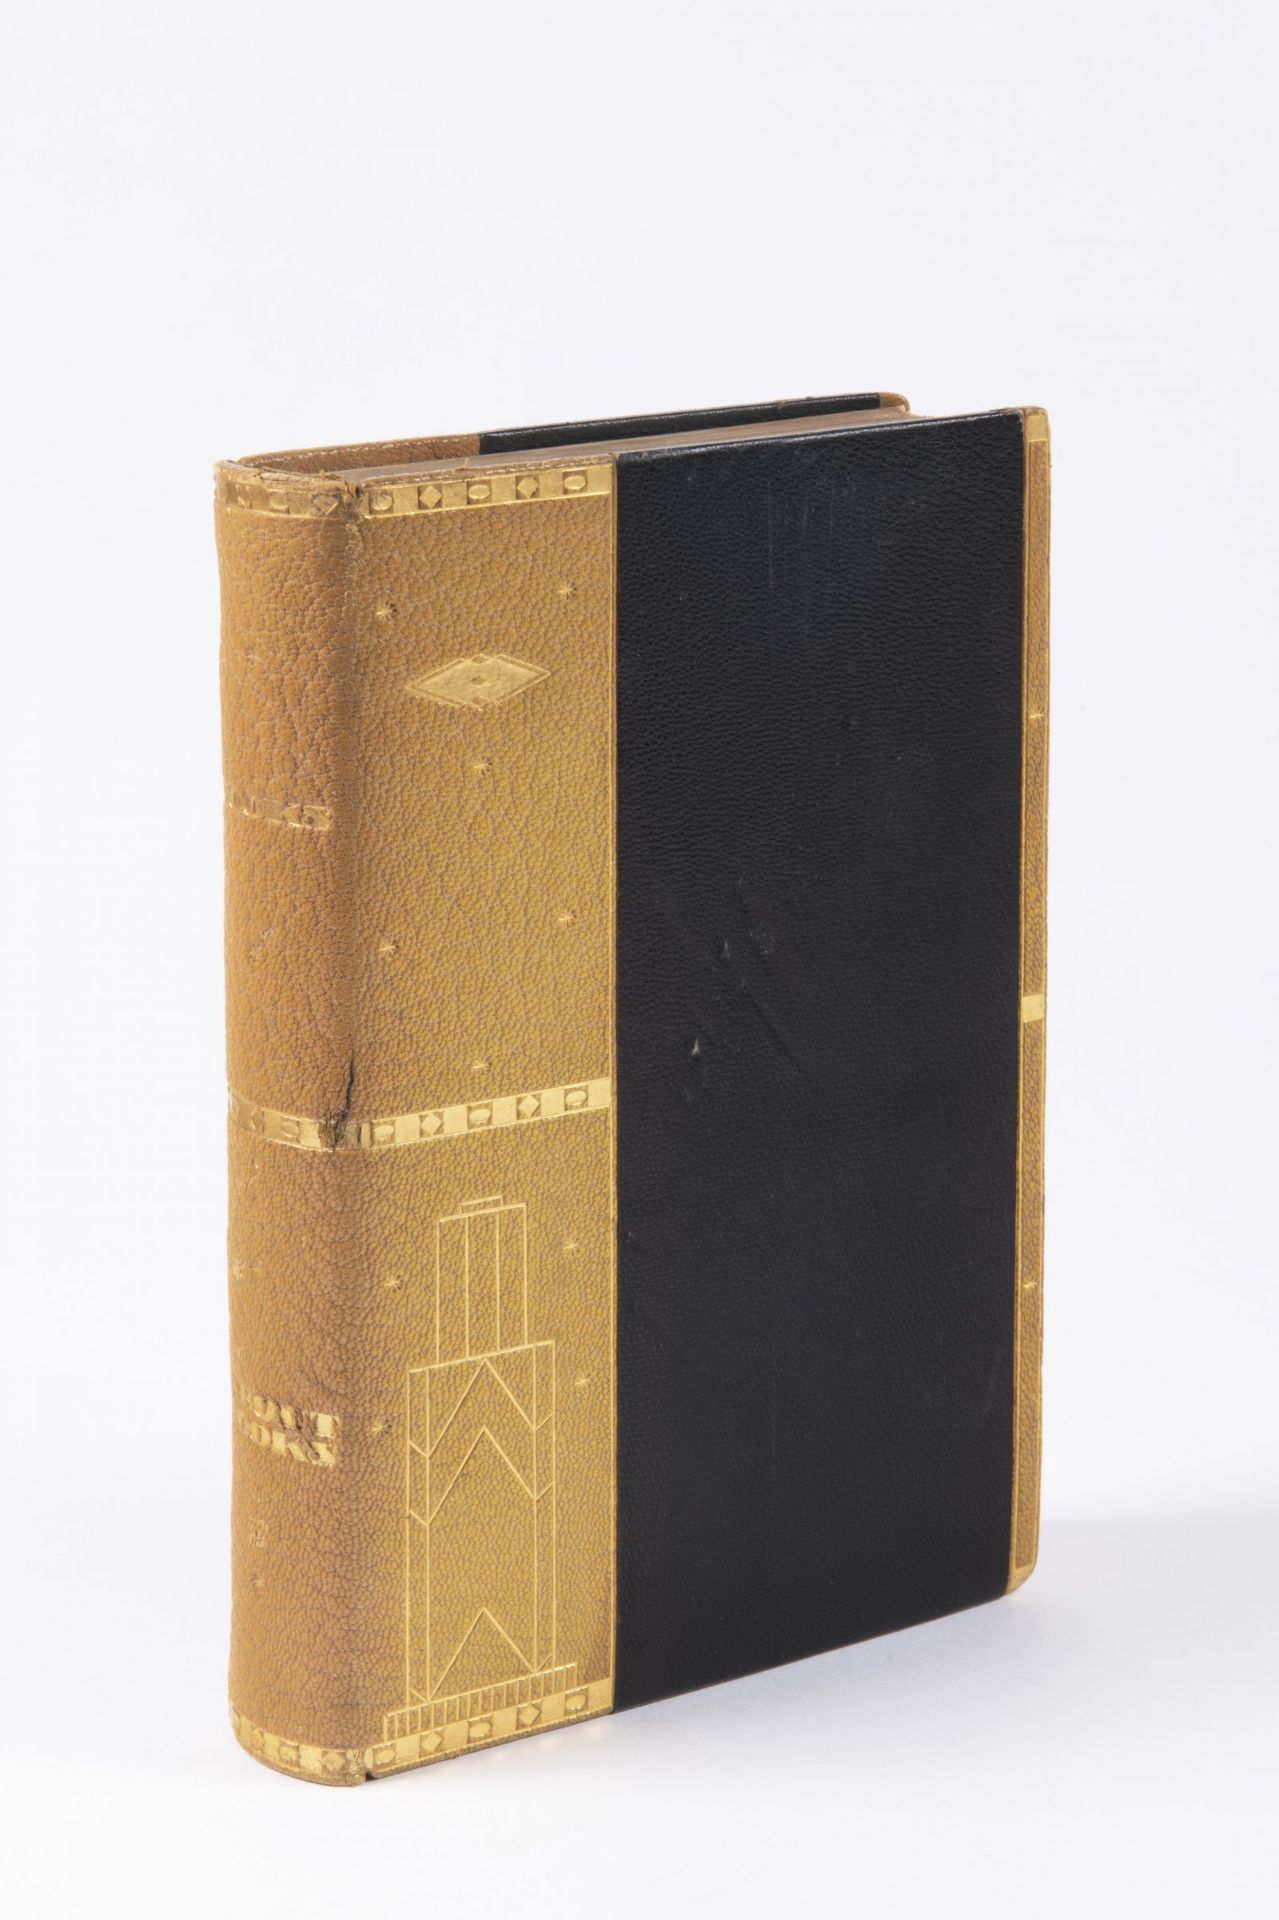 BOOK DESIGNED BY THE WIENER WERKSTÄTTE 1920s Paper, textile, gilded leather 21 x 14 x 3,5 cm Signed: